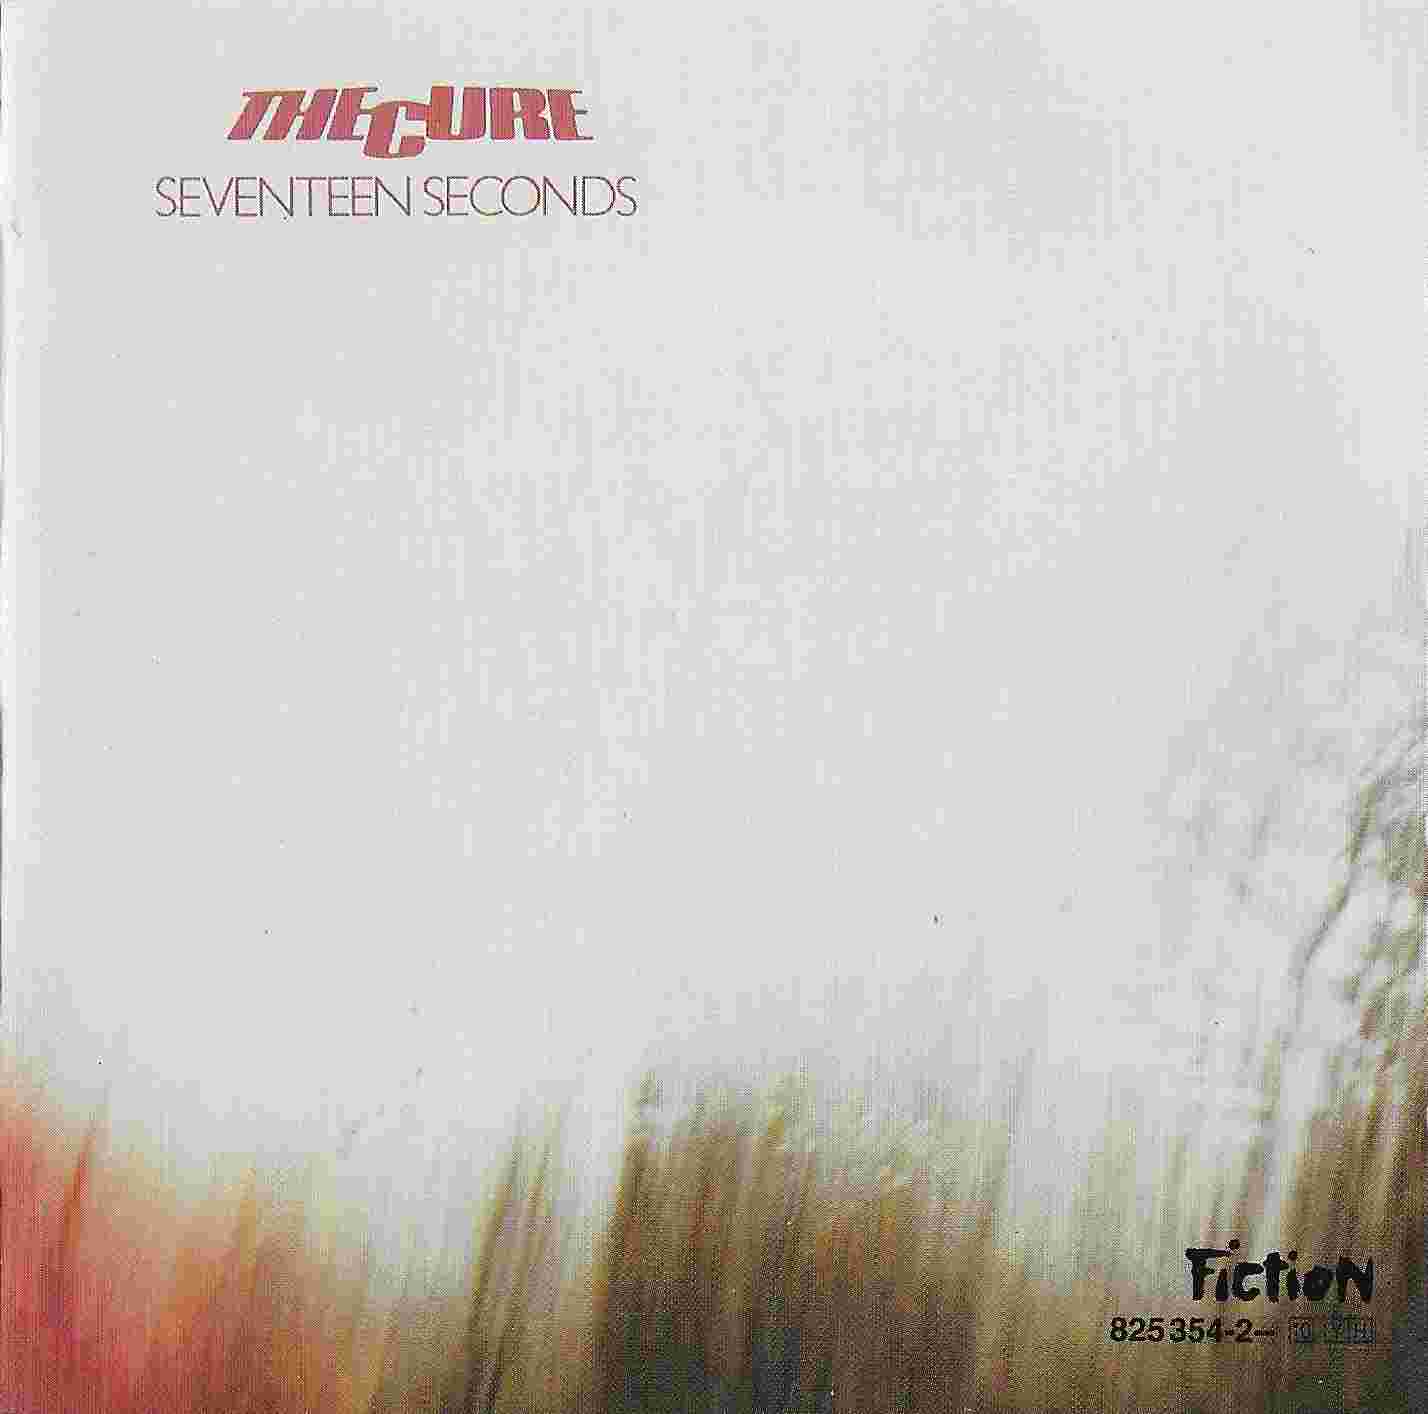 Picture of Seventeen seconds by artist The Cure 